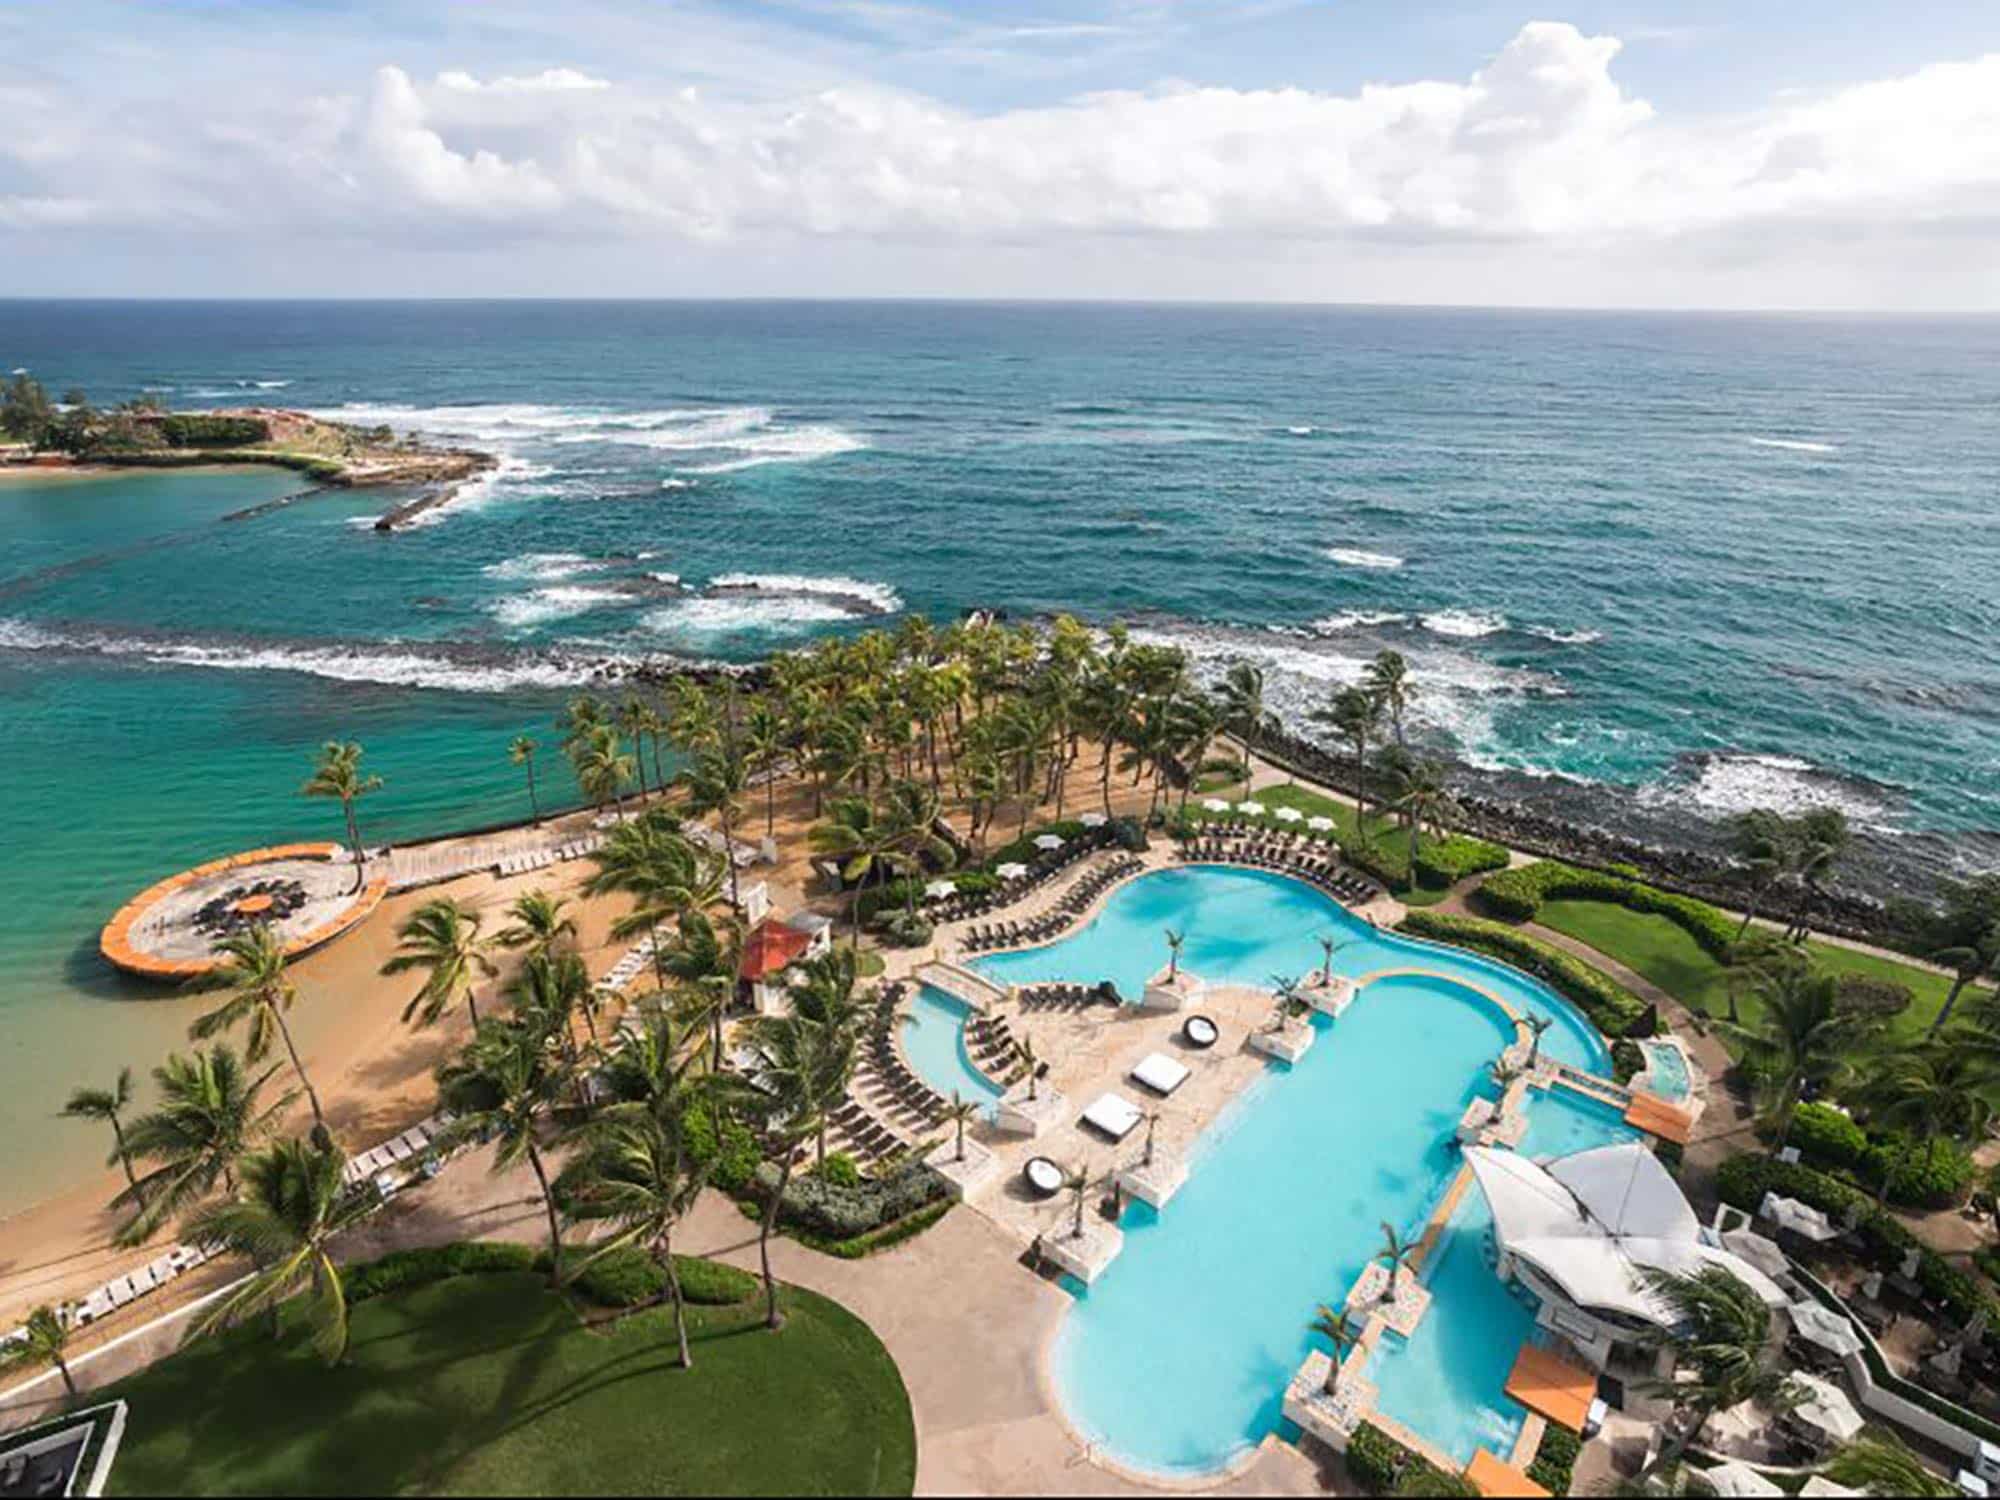 An aerial view of the pool and property at Caribe Hilton in Puerto Rico.